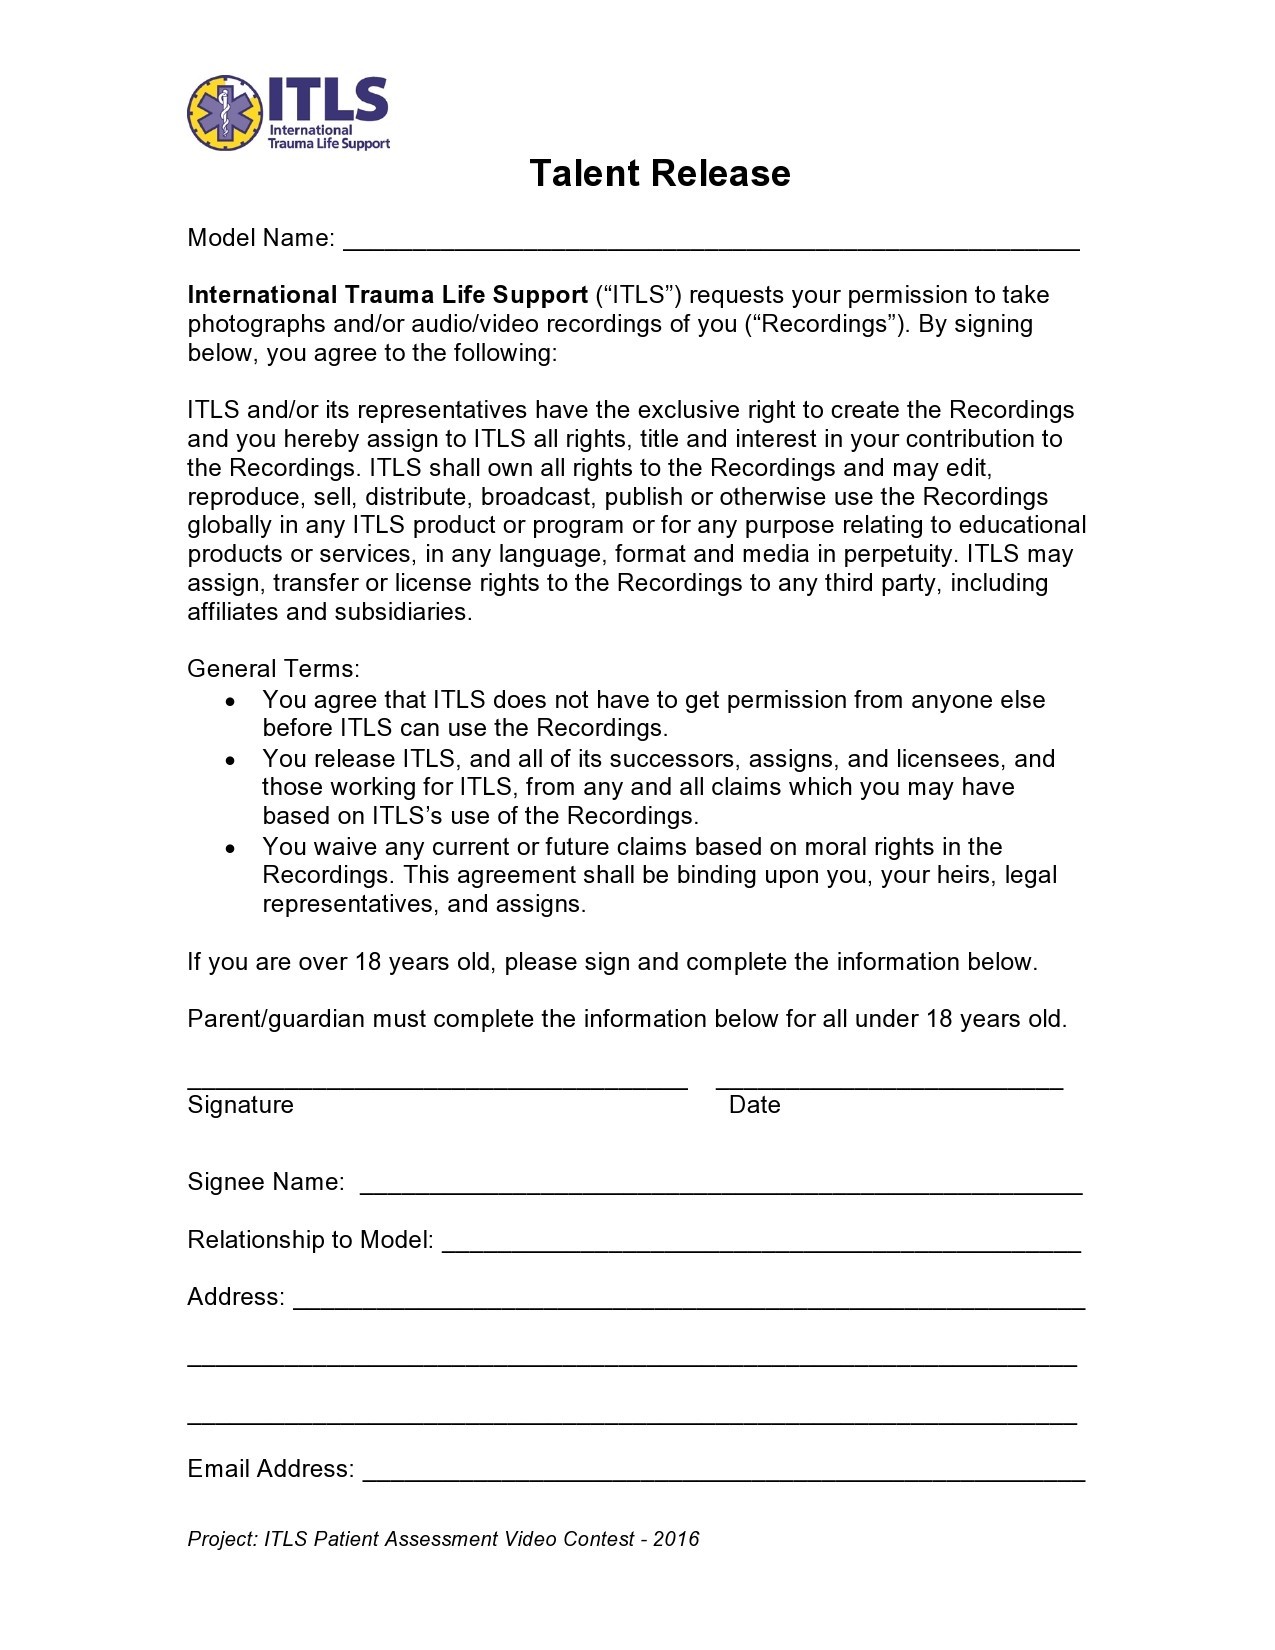 Free talent release form 12